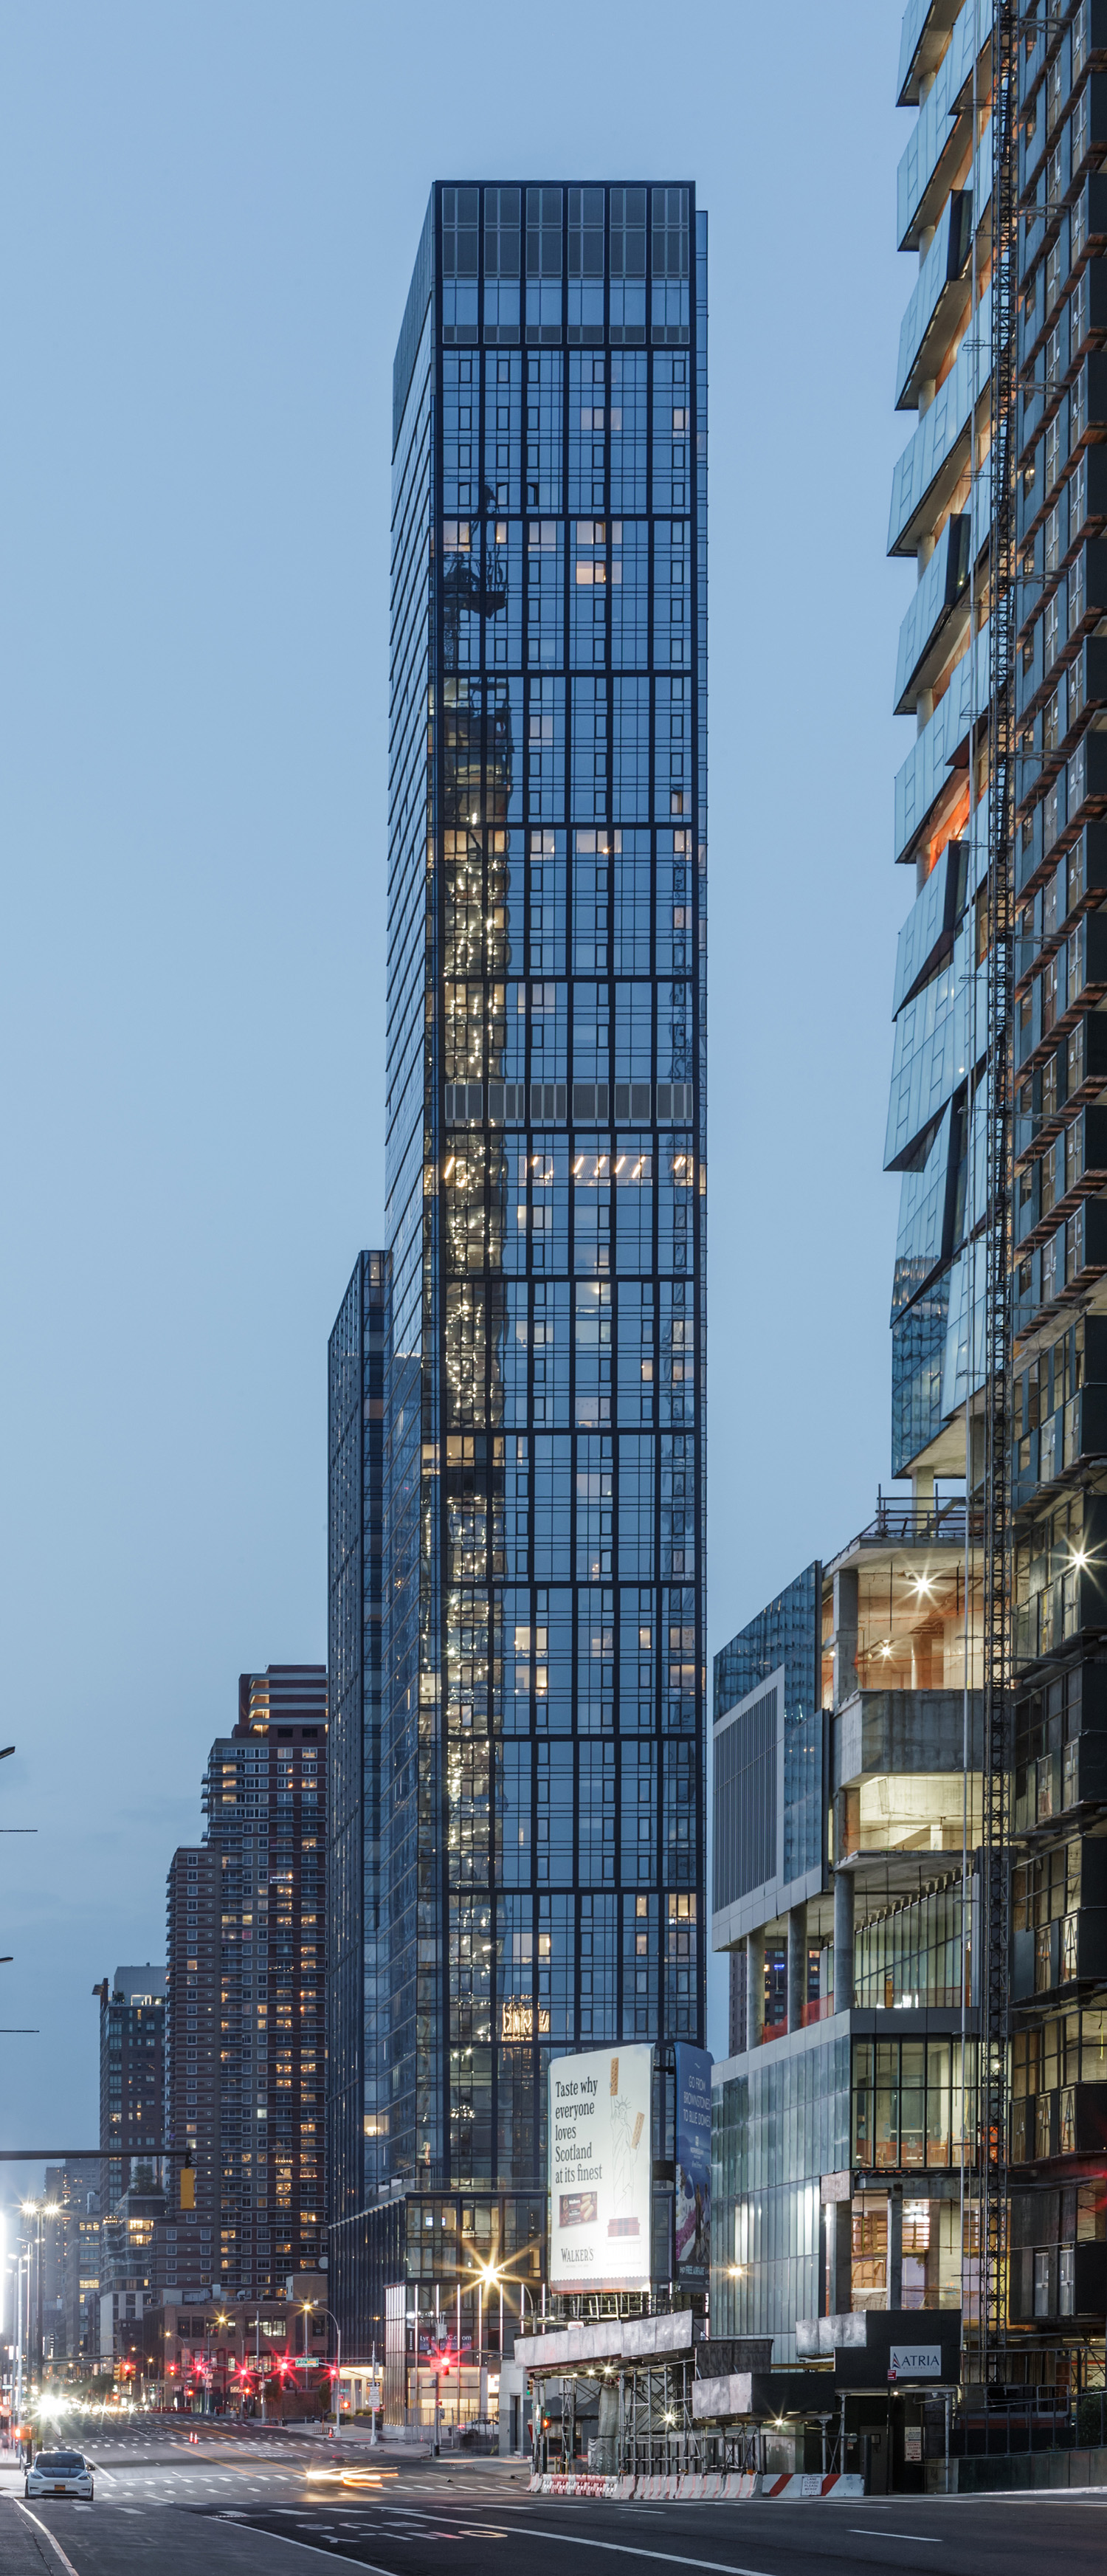 555 West 38th Street, New York City - View from the southwest. © Mathias Beinling